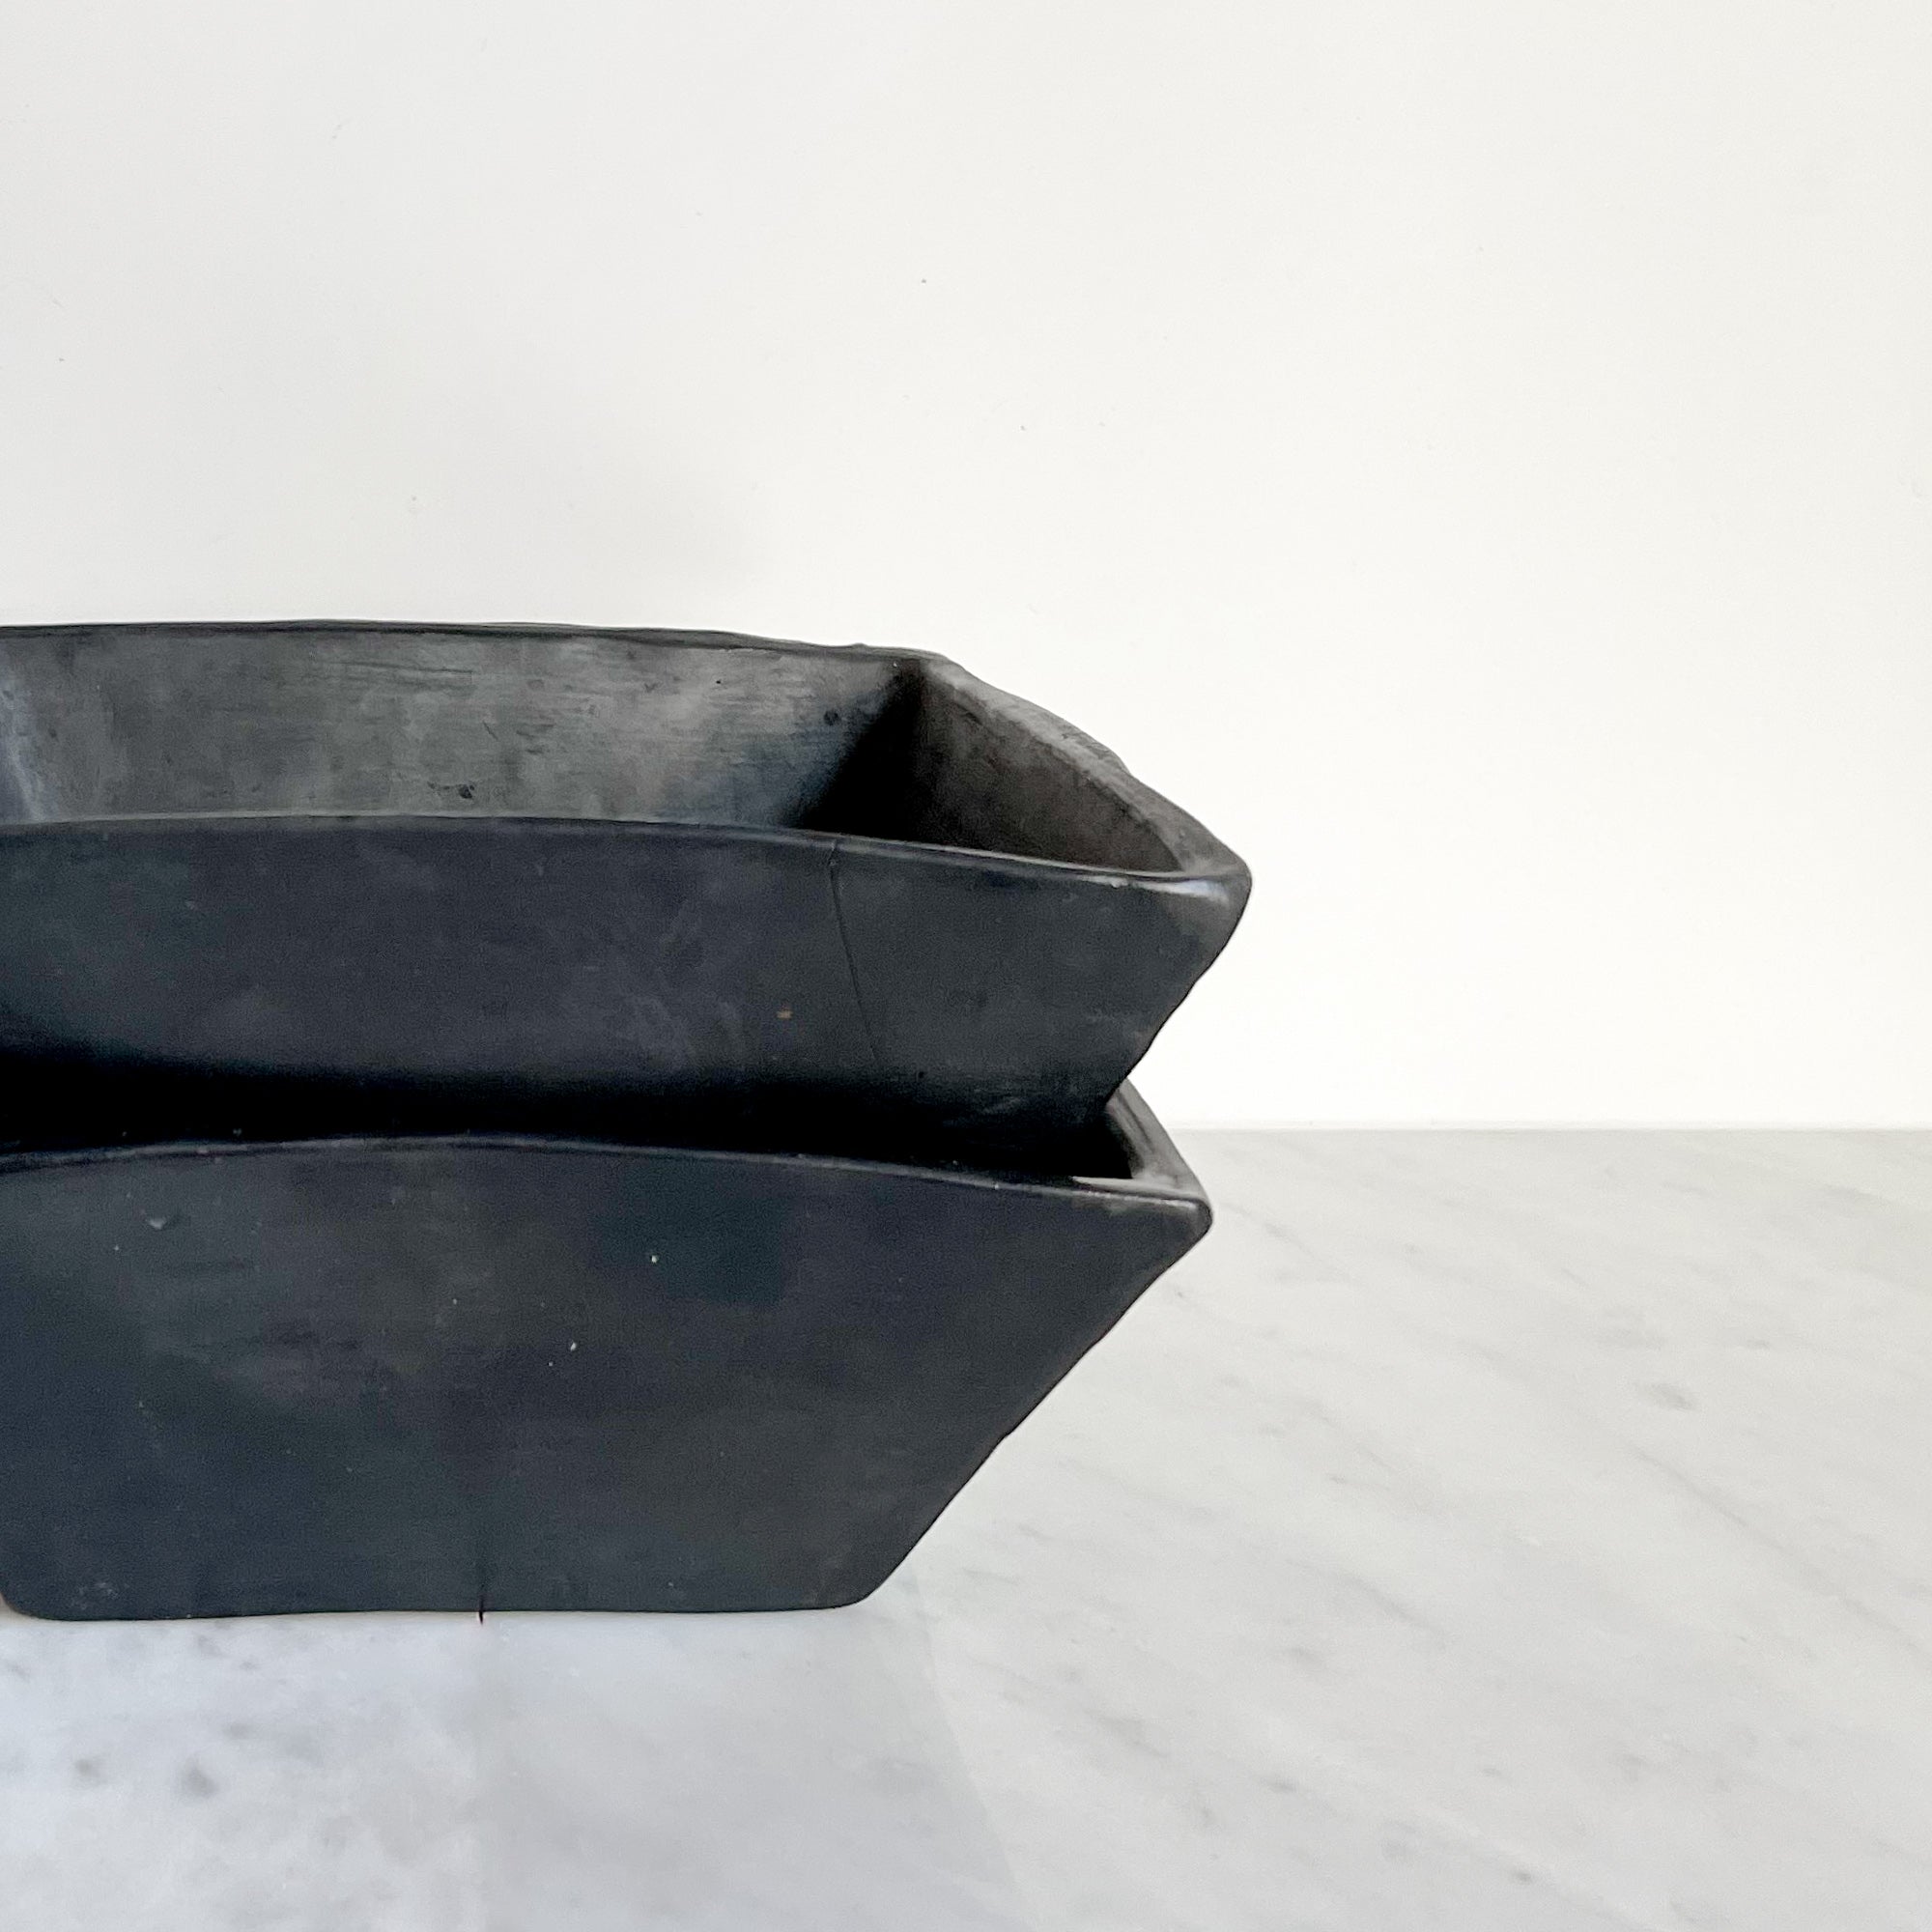 A set of two stacked Oaxaca black clay square bowls.